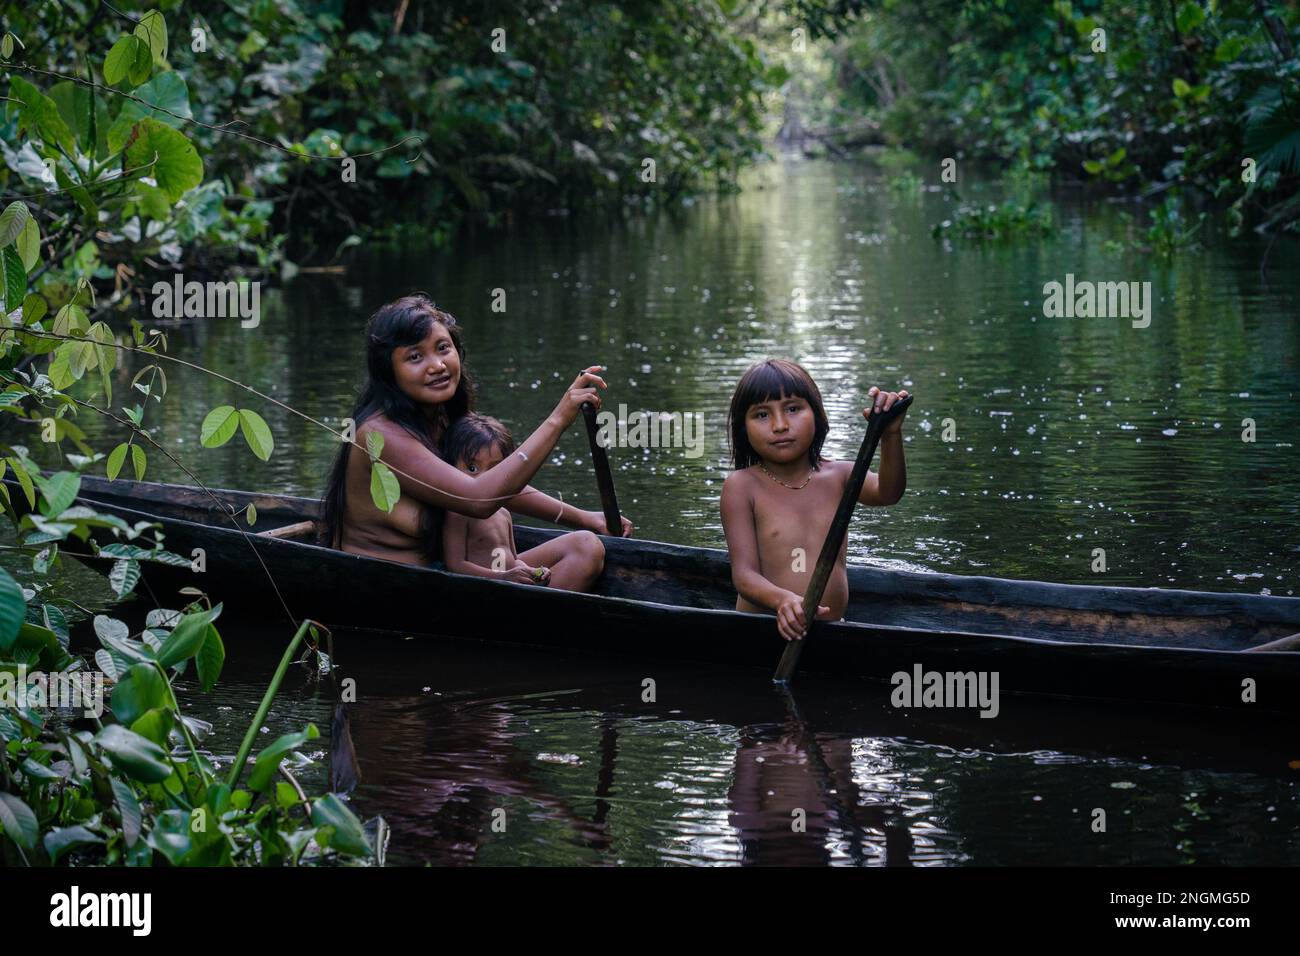 Family of native indigenous Orinoco tribe Warao swimming in traditional wooden canoe among the mangroves Stock Photo